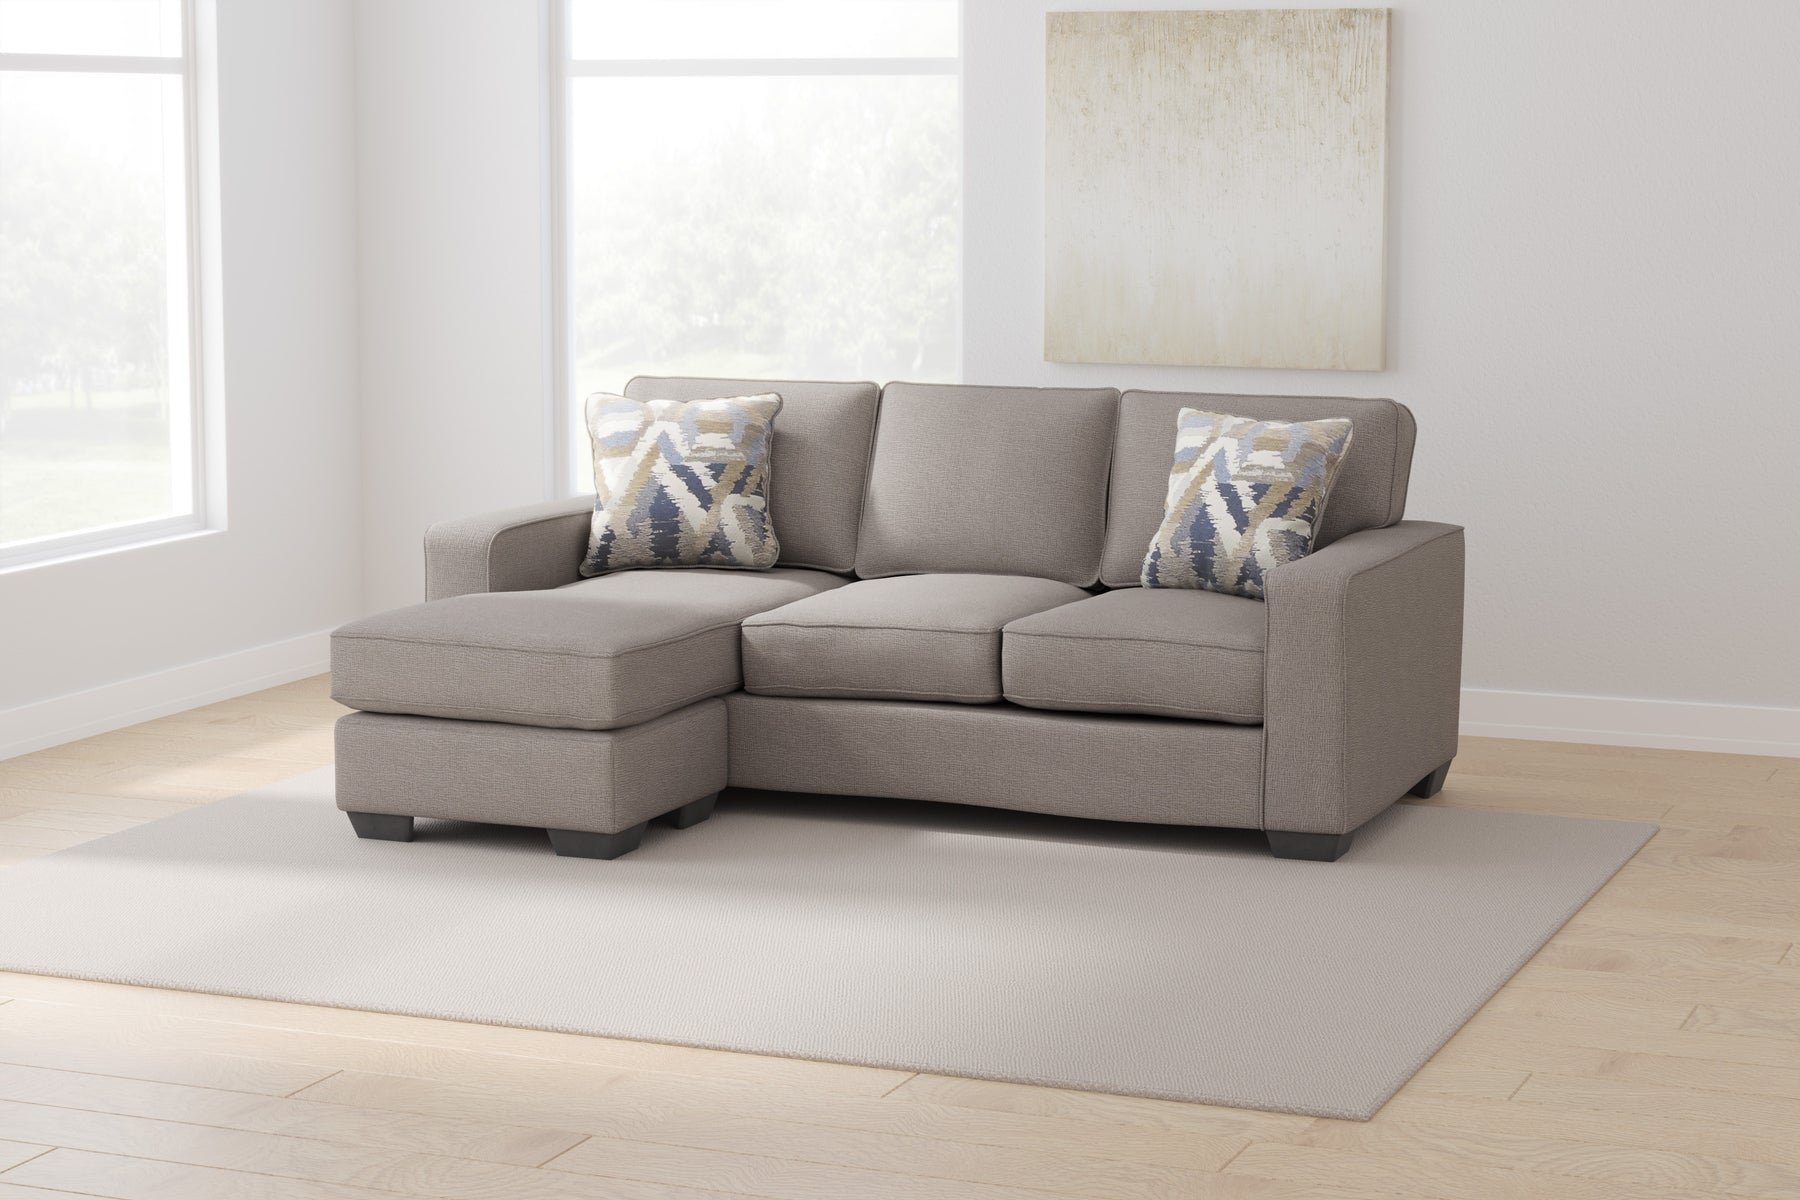 Greaves Sofa Chaise availble in two colors Greaves Sofa Chaise availble in two colors | Cheap living rooms furniture Las Vegas Nevada Half Price Furniture